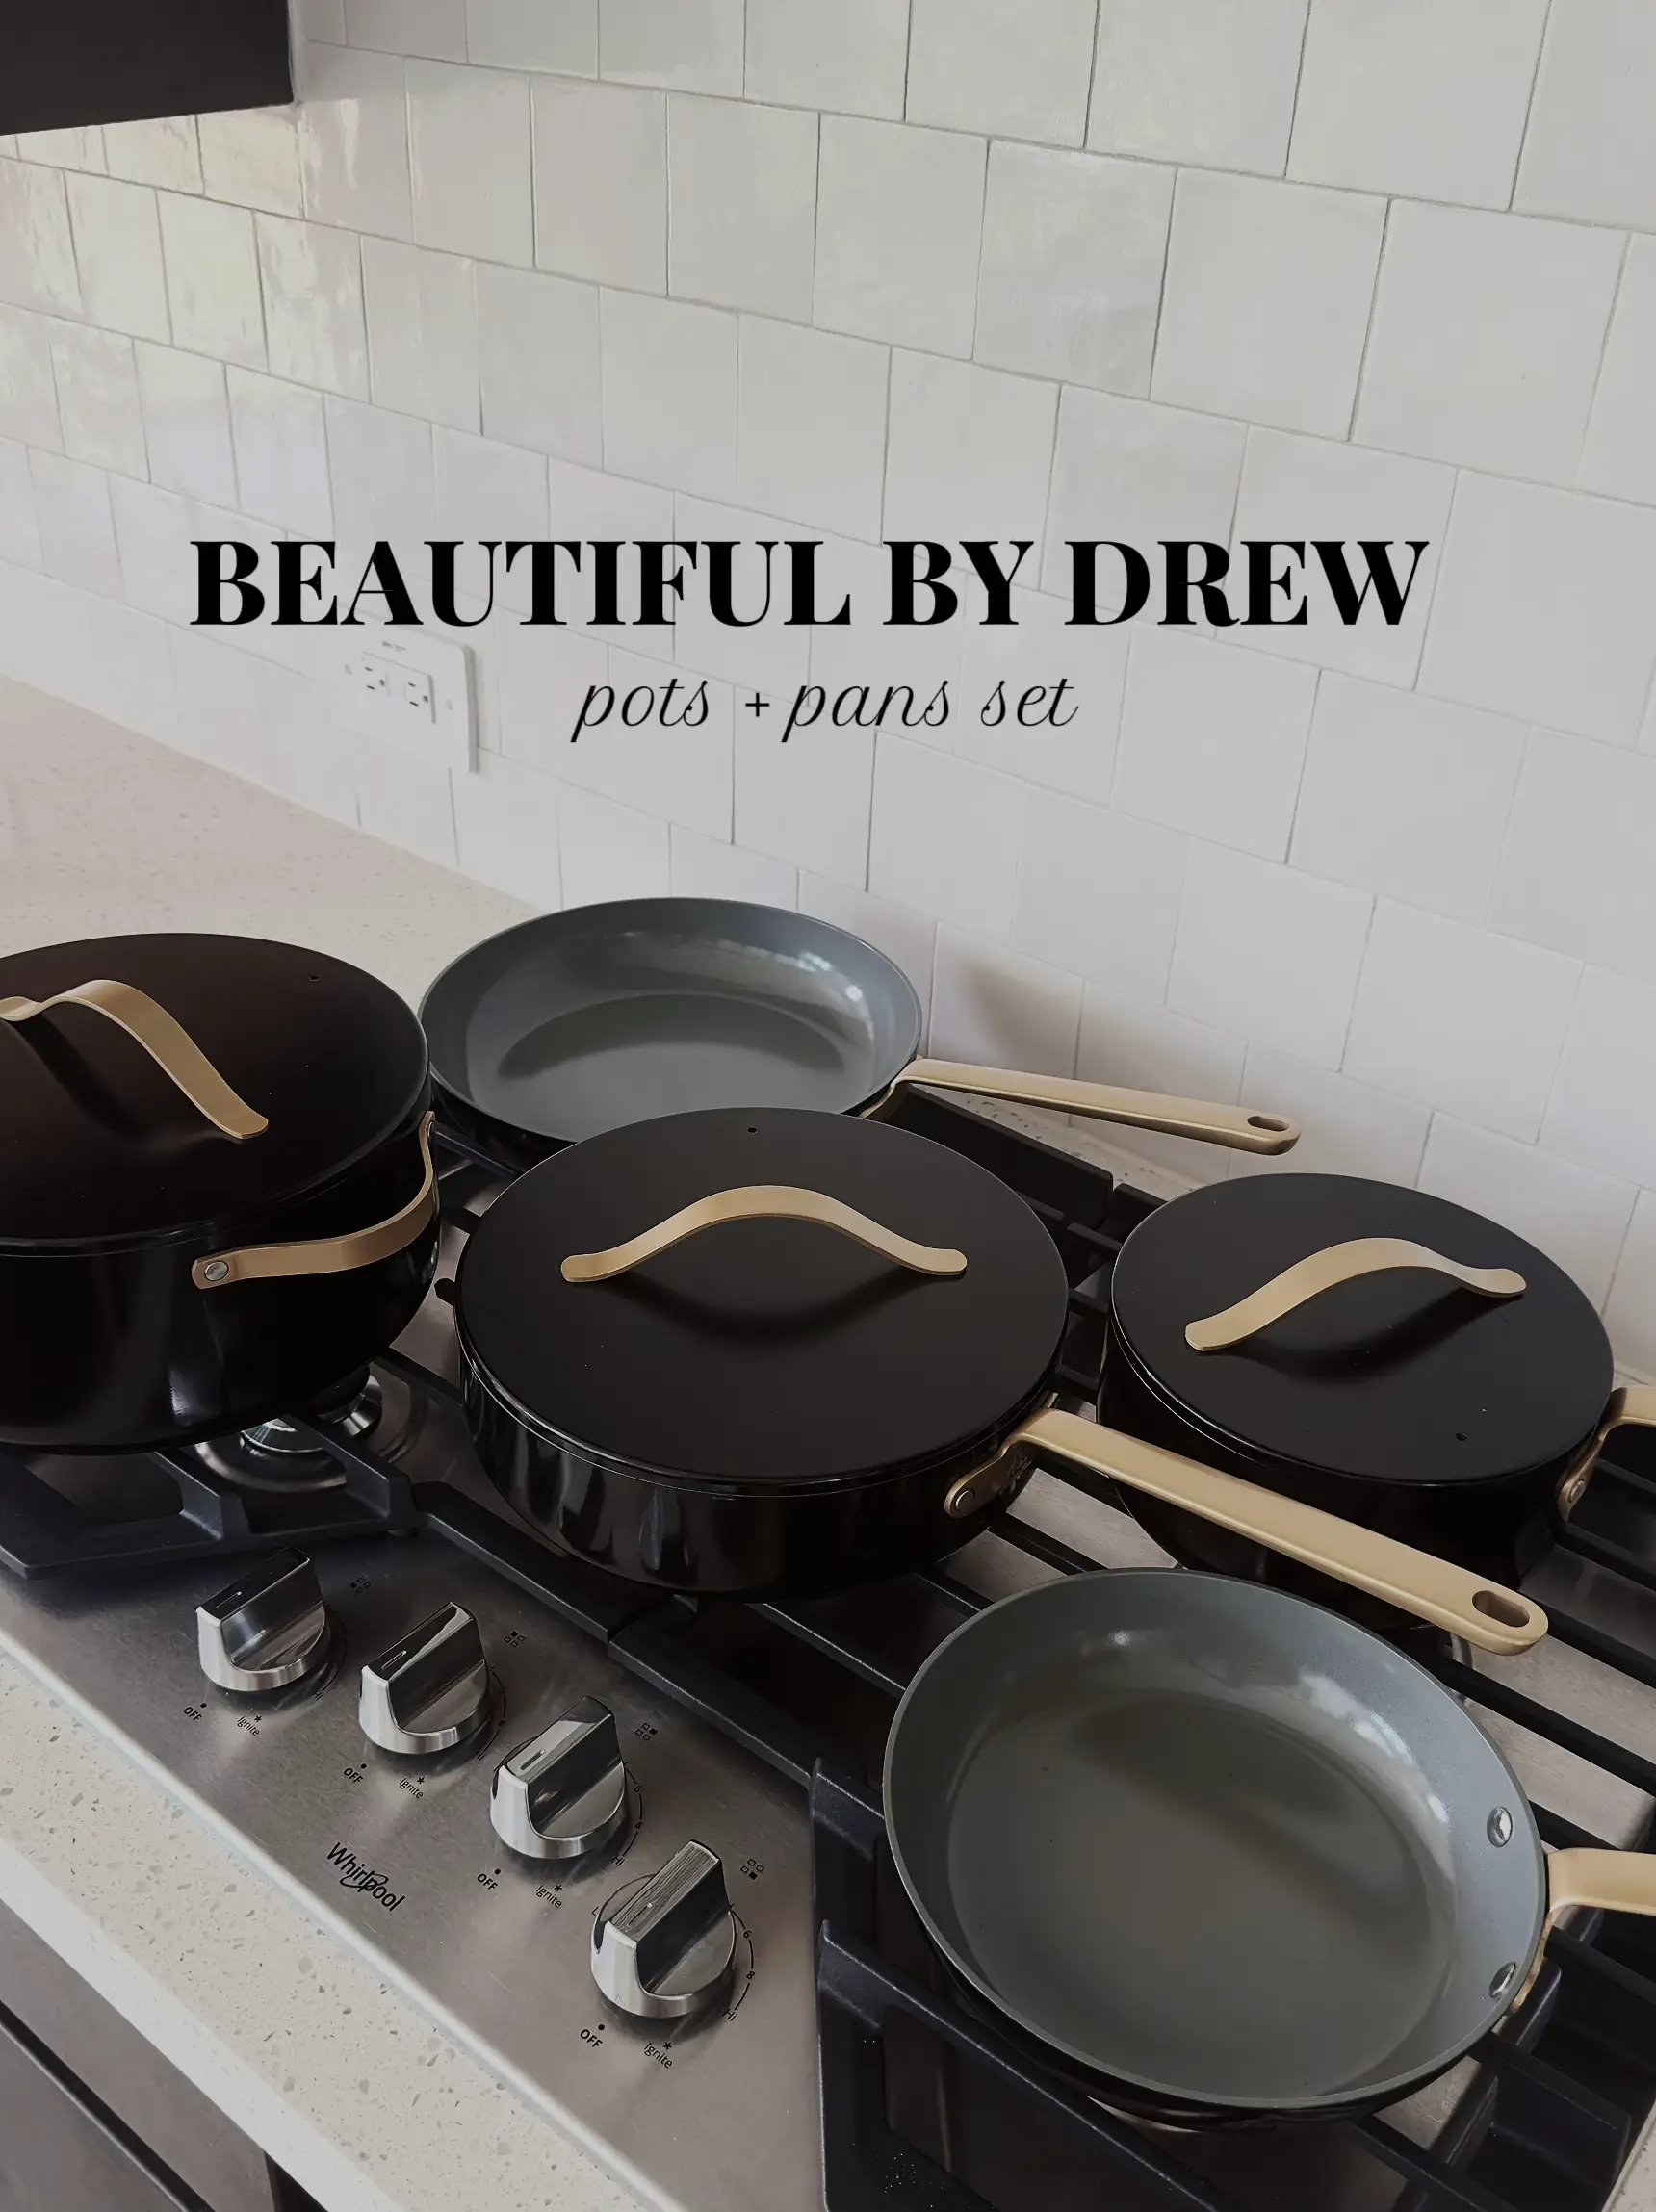 Drew Barrymore's new cookware line has pieces for hosting